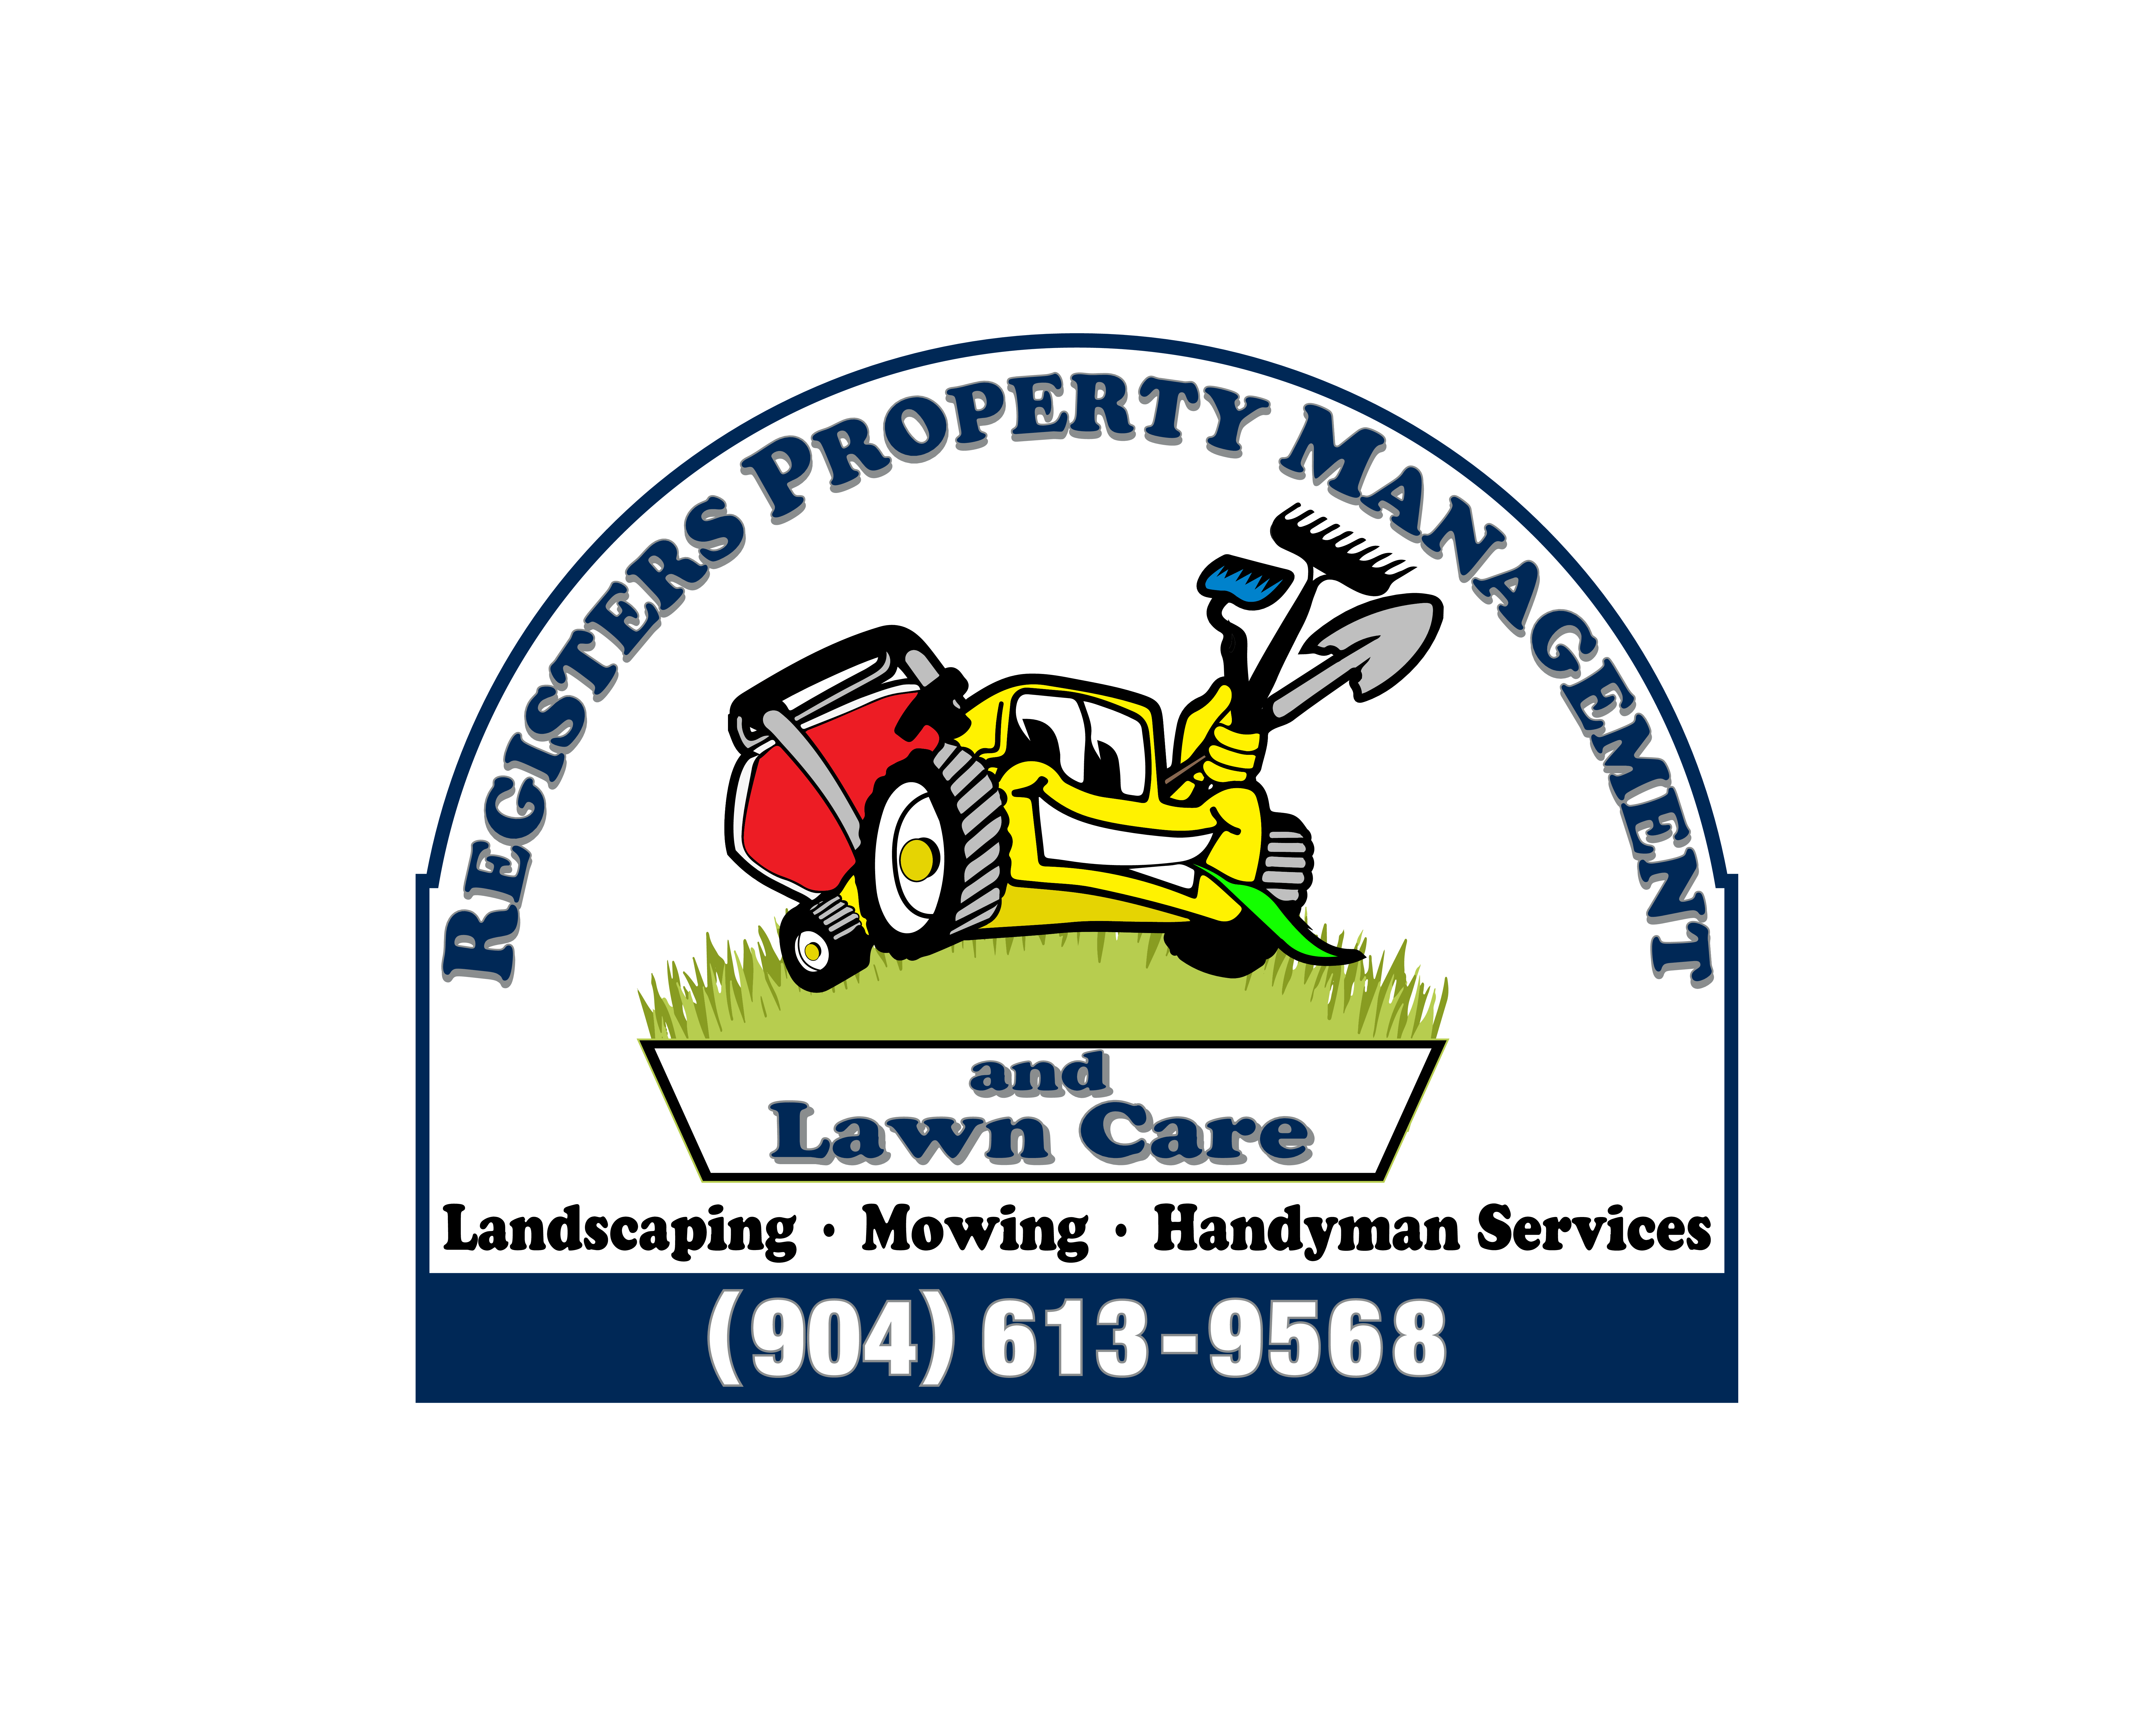 Register's Property Mgmt. And Lawn Service Logo